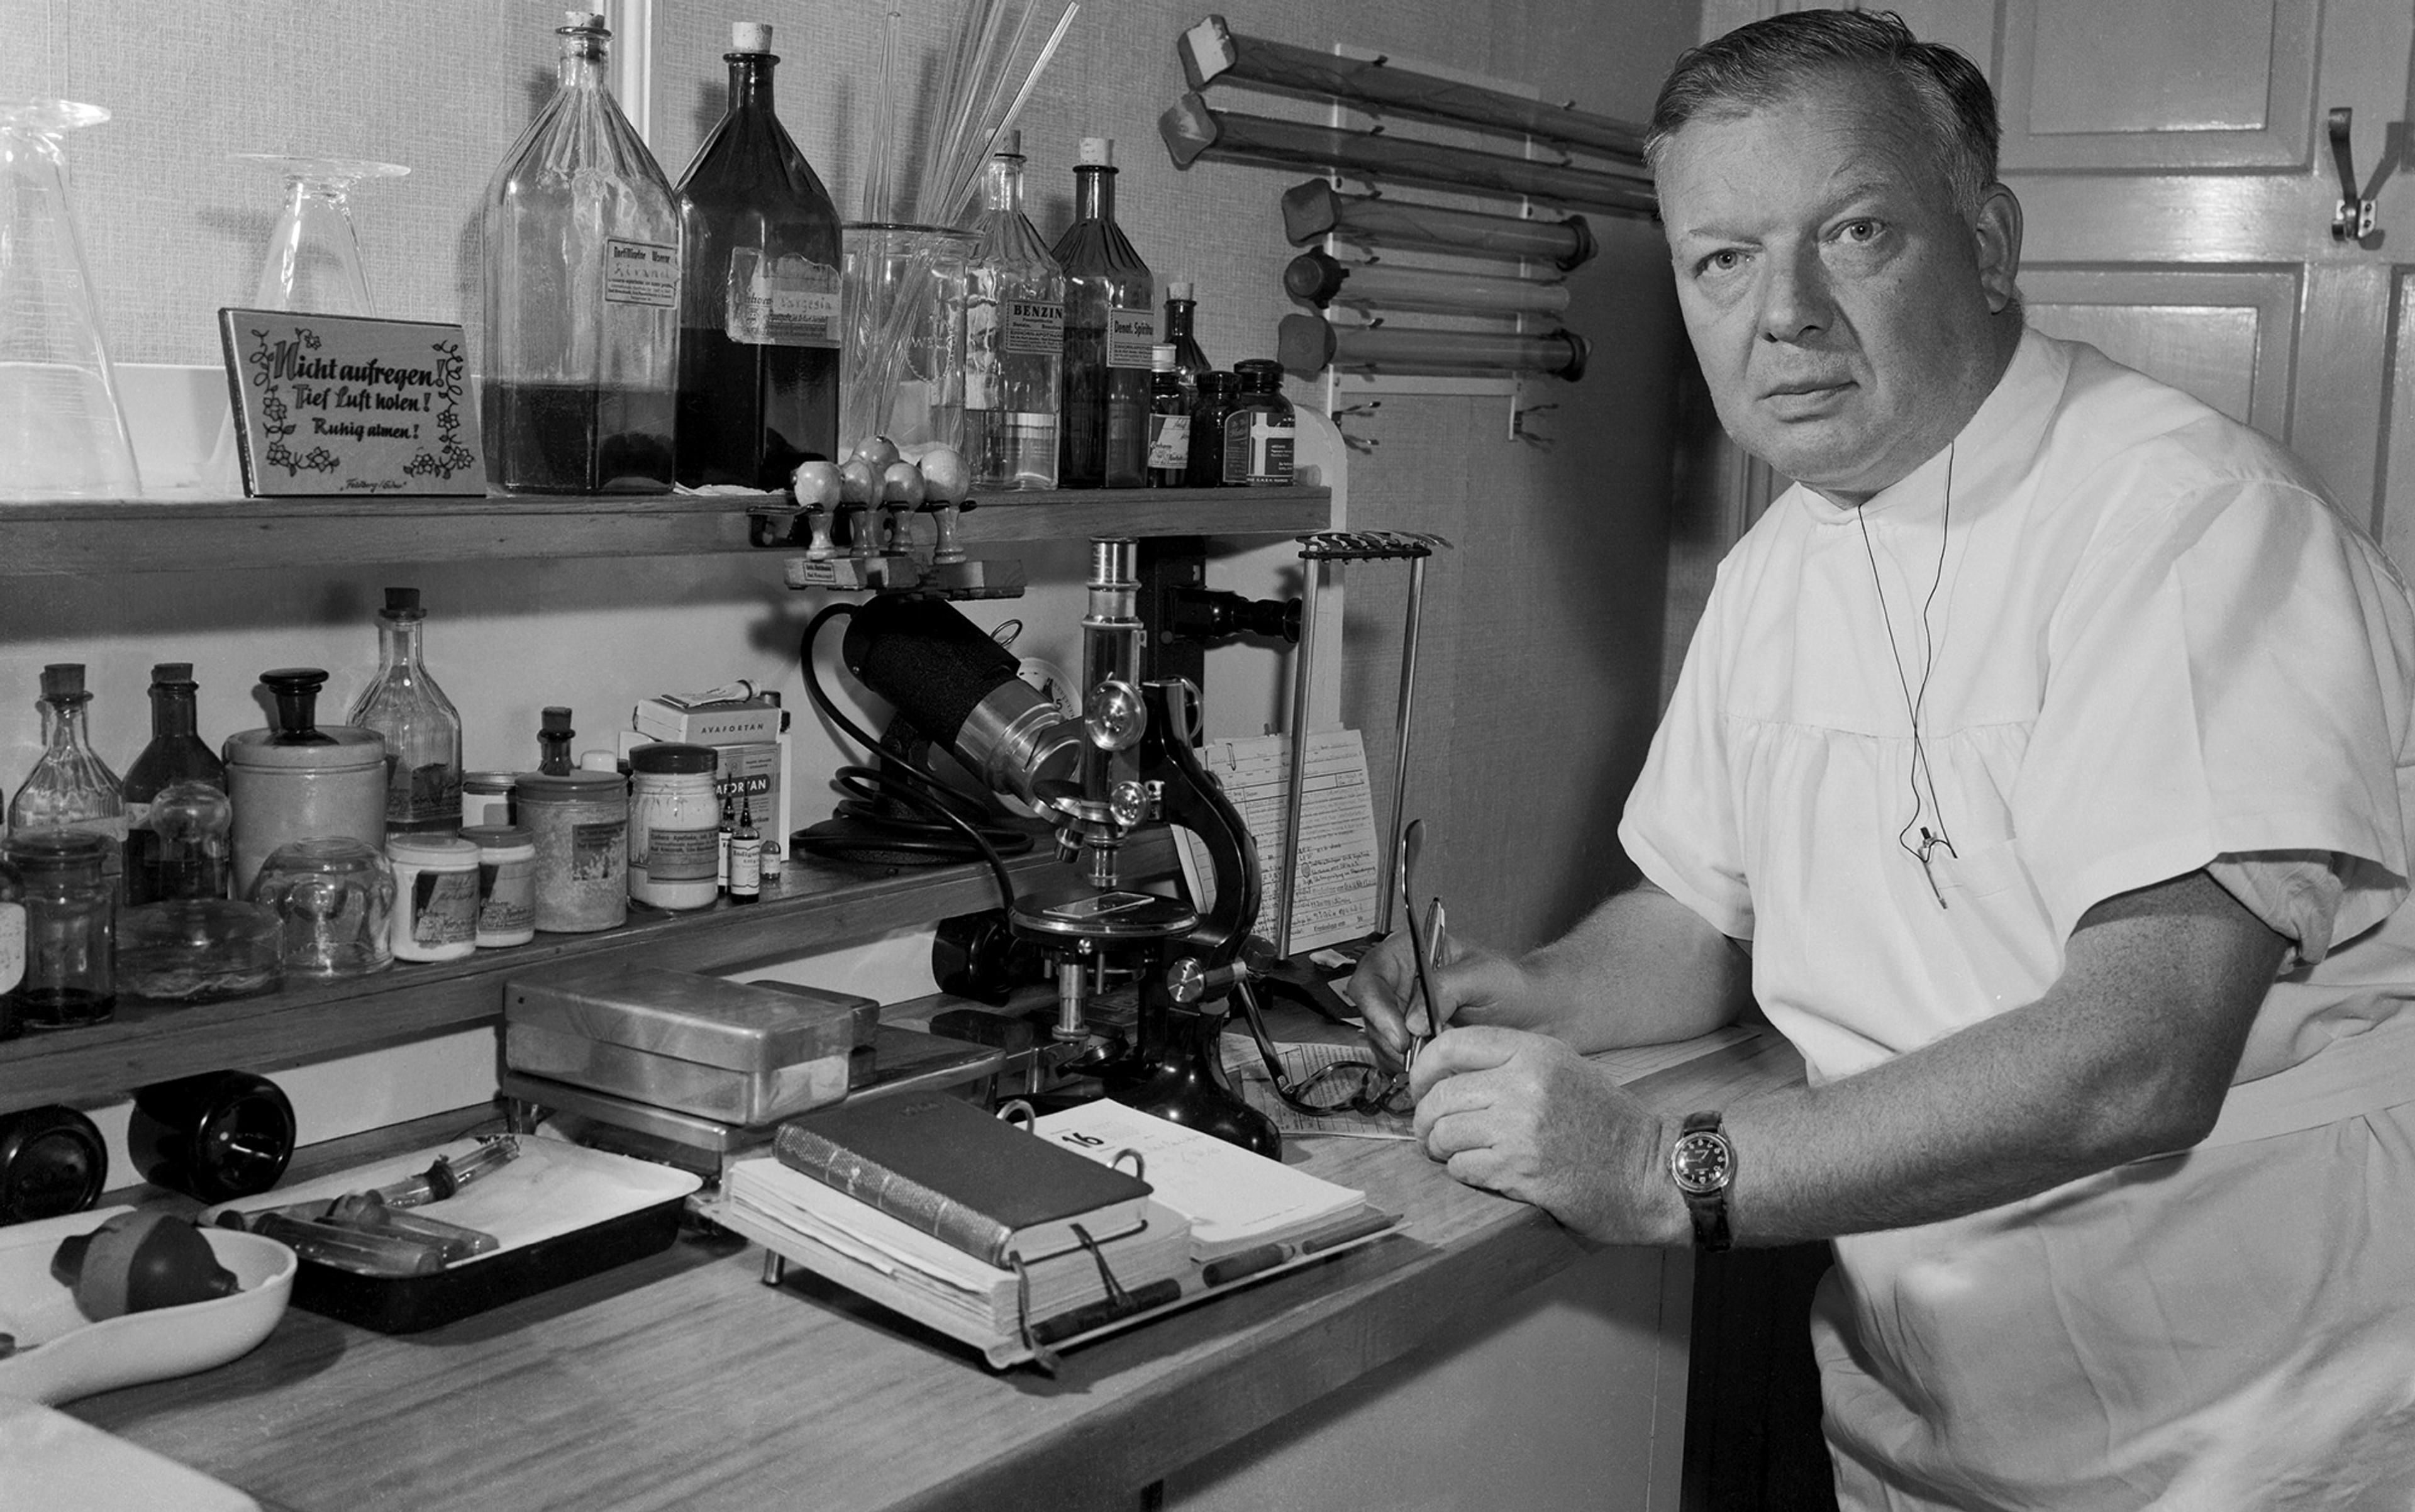 A black and white photo of a man in doctor’s clothing posed next to a lab bench with a microscope looking directly at the camera